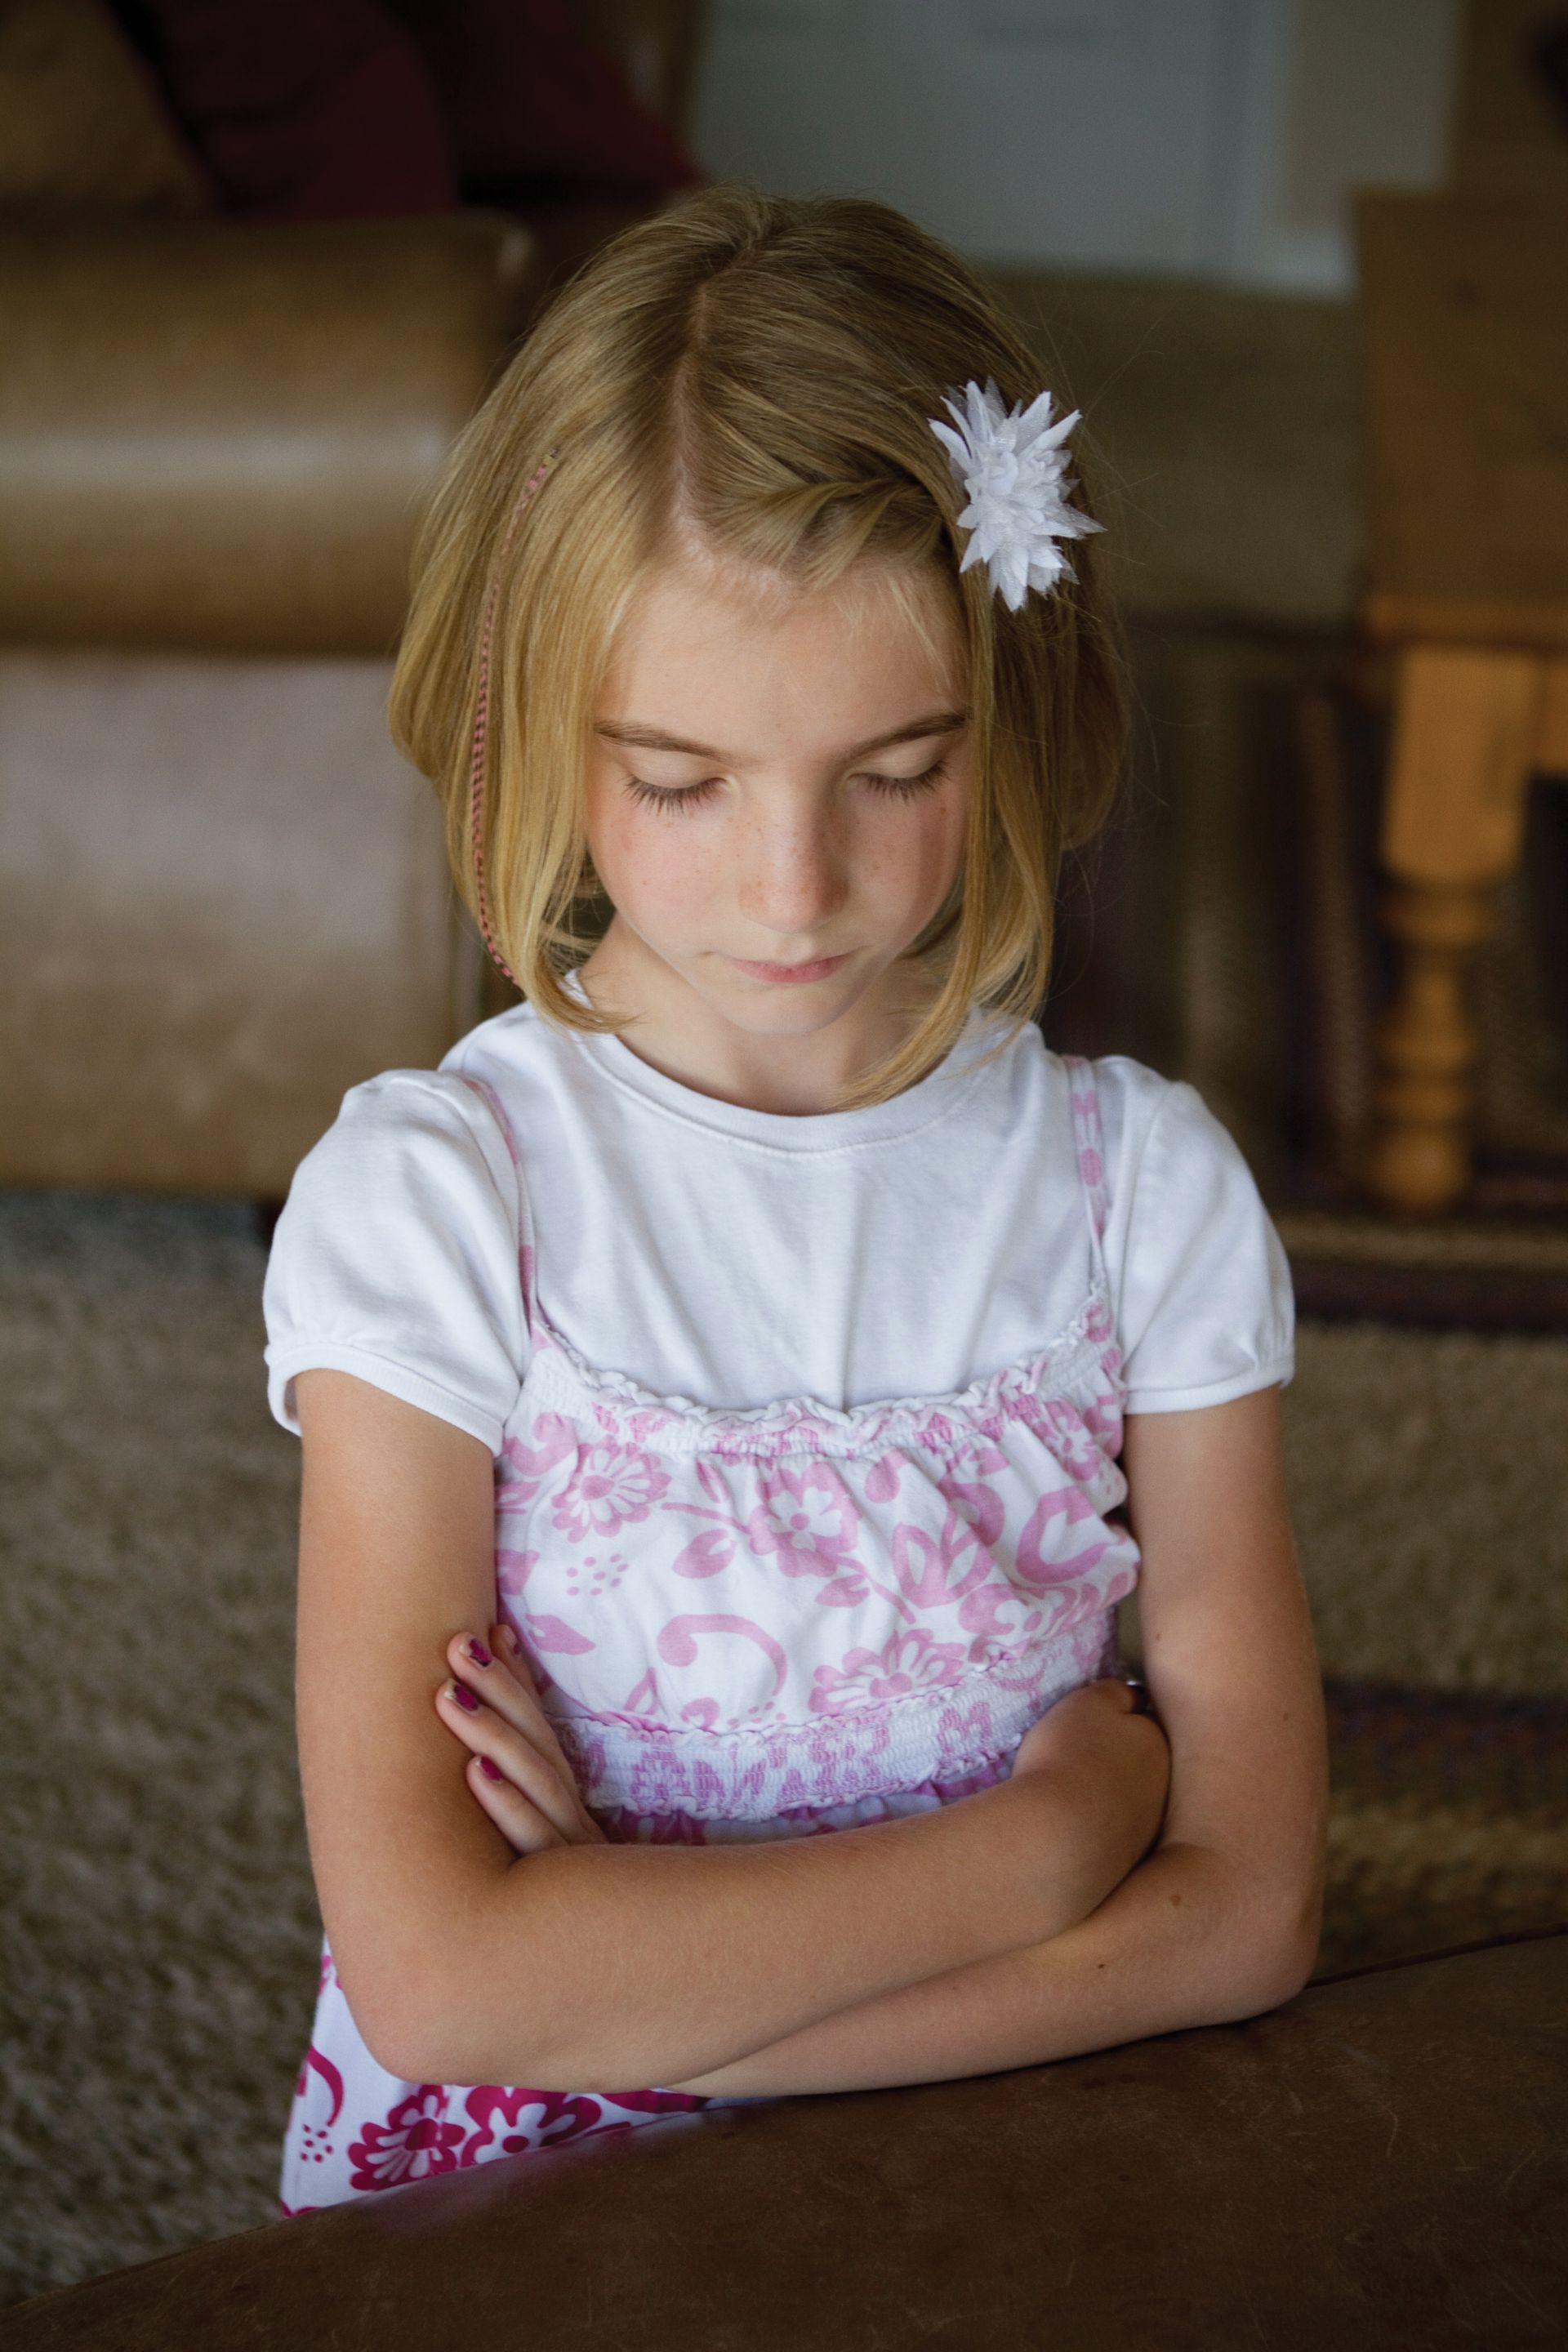 A young girl prays, kneeling in the living room.